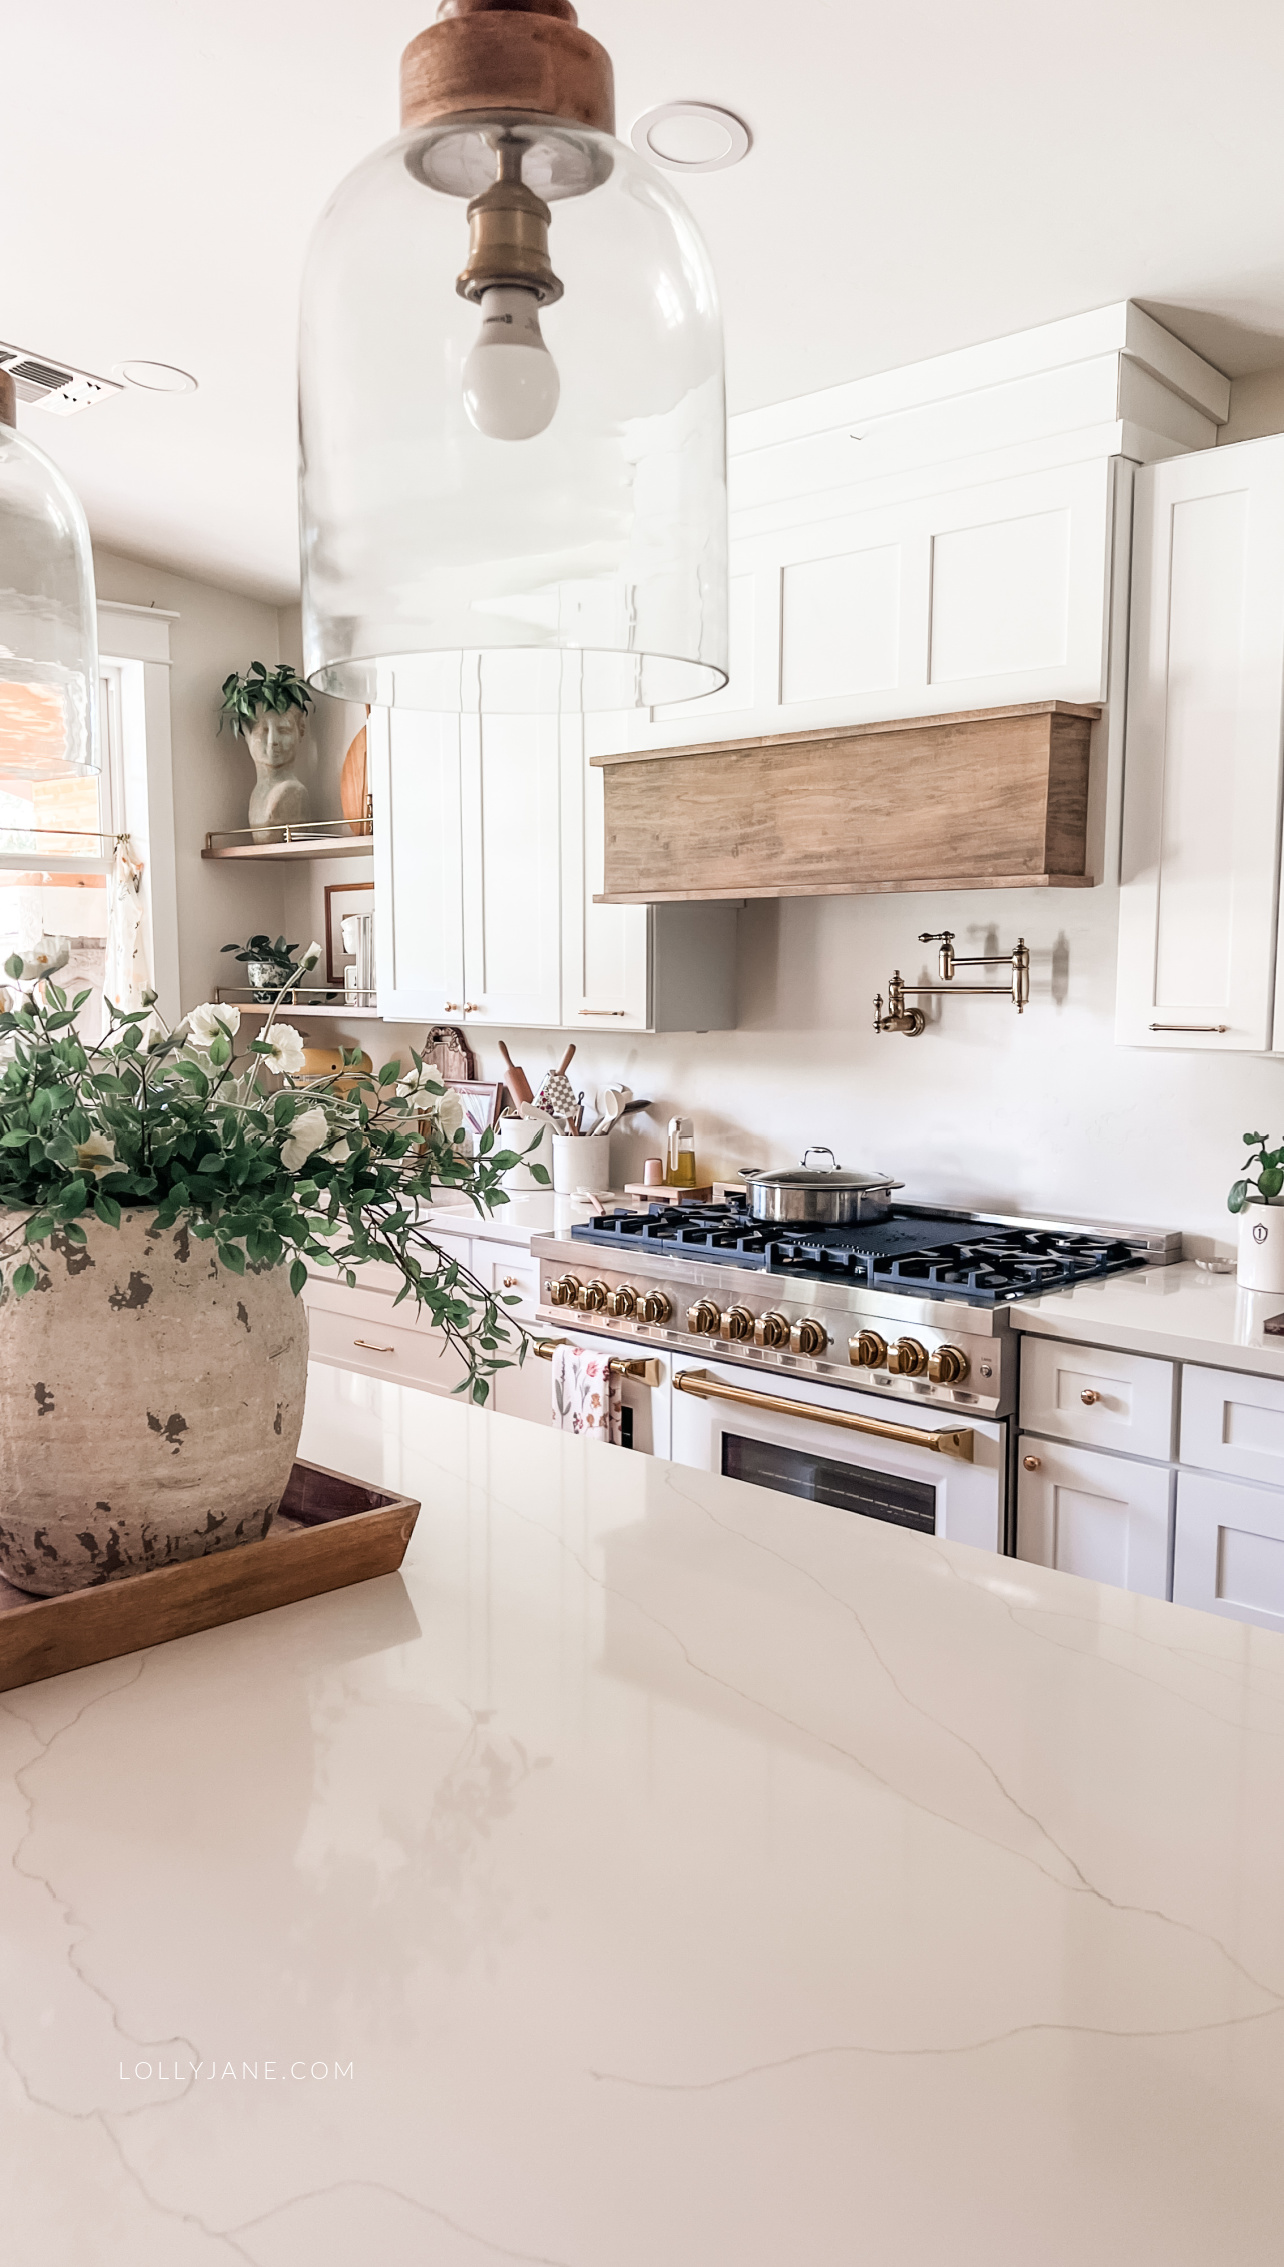 Make your kitchen both stylish and cozy with white cabinets, gold hardware, and charming decor touches that reflect your taste.